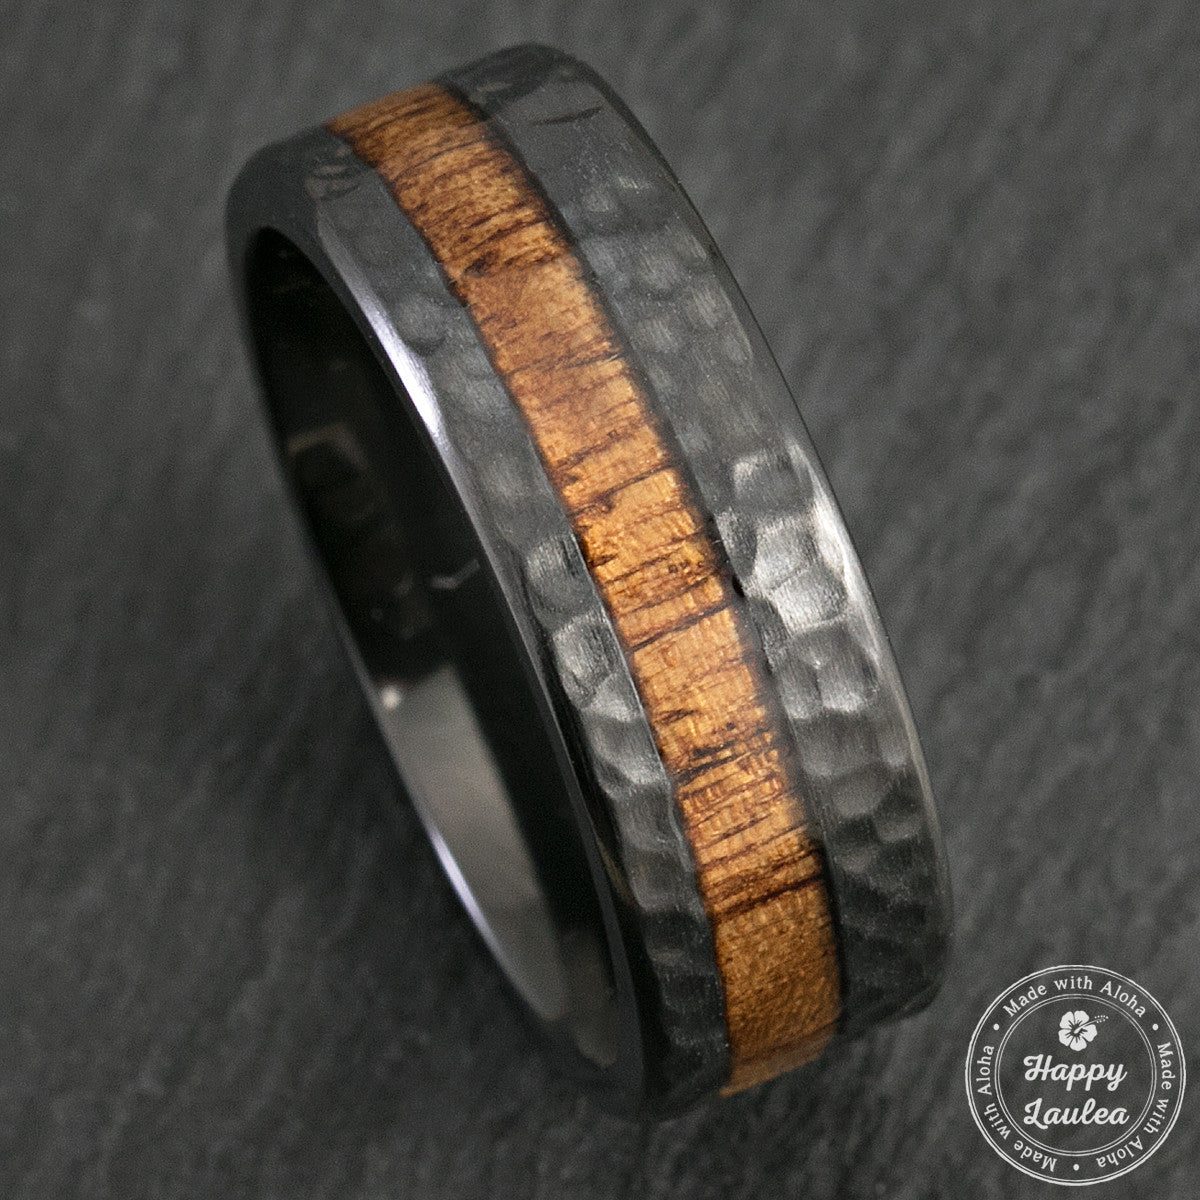 Black Zirconium Ring with Fish Hook Laser-etched Pattern Inlay Custom Made Band